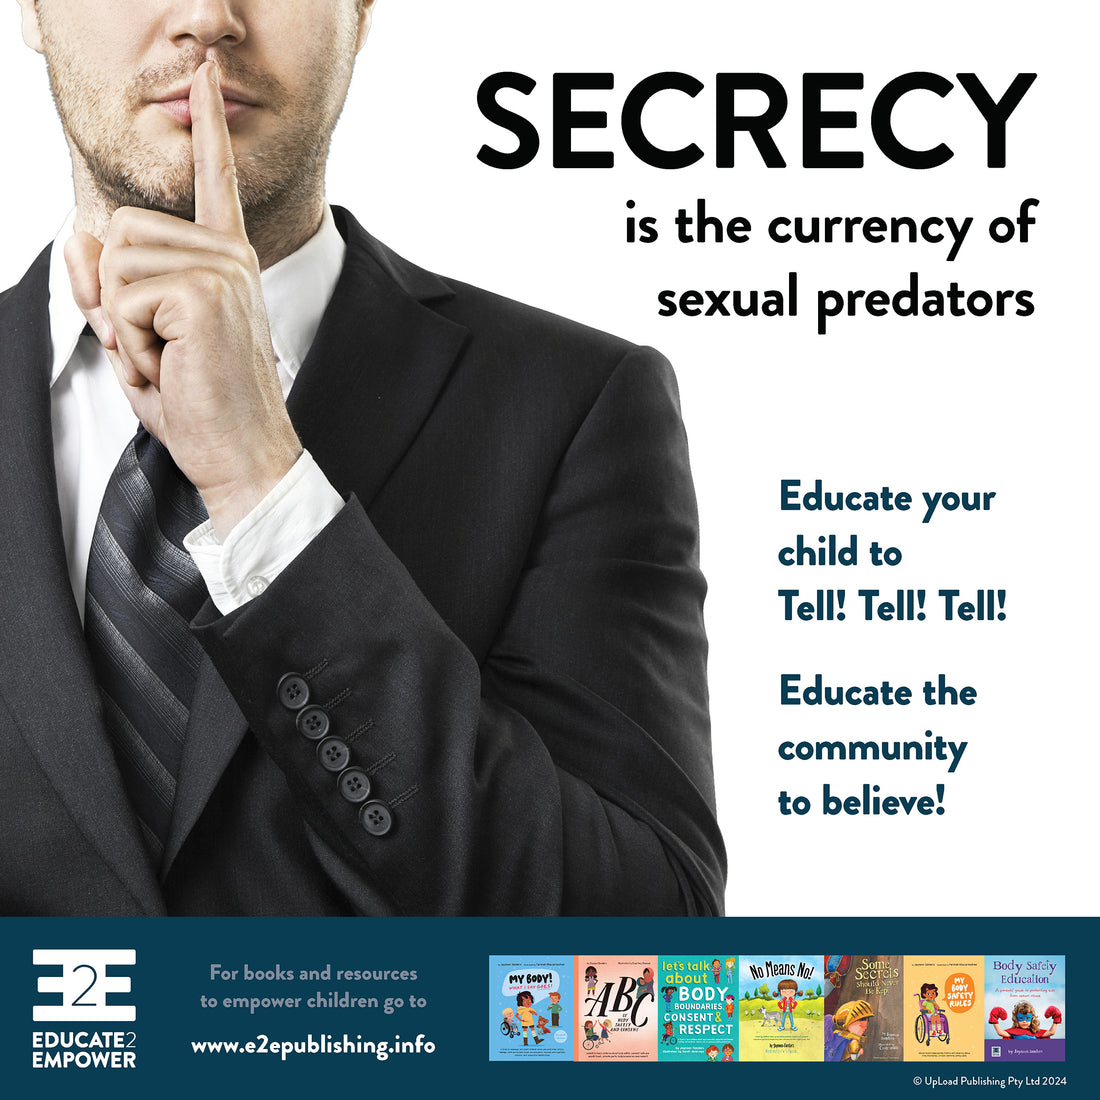 SECRECY is the currency of sexual predators